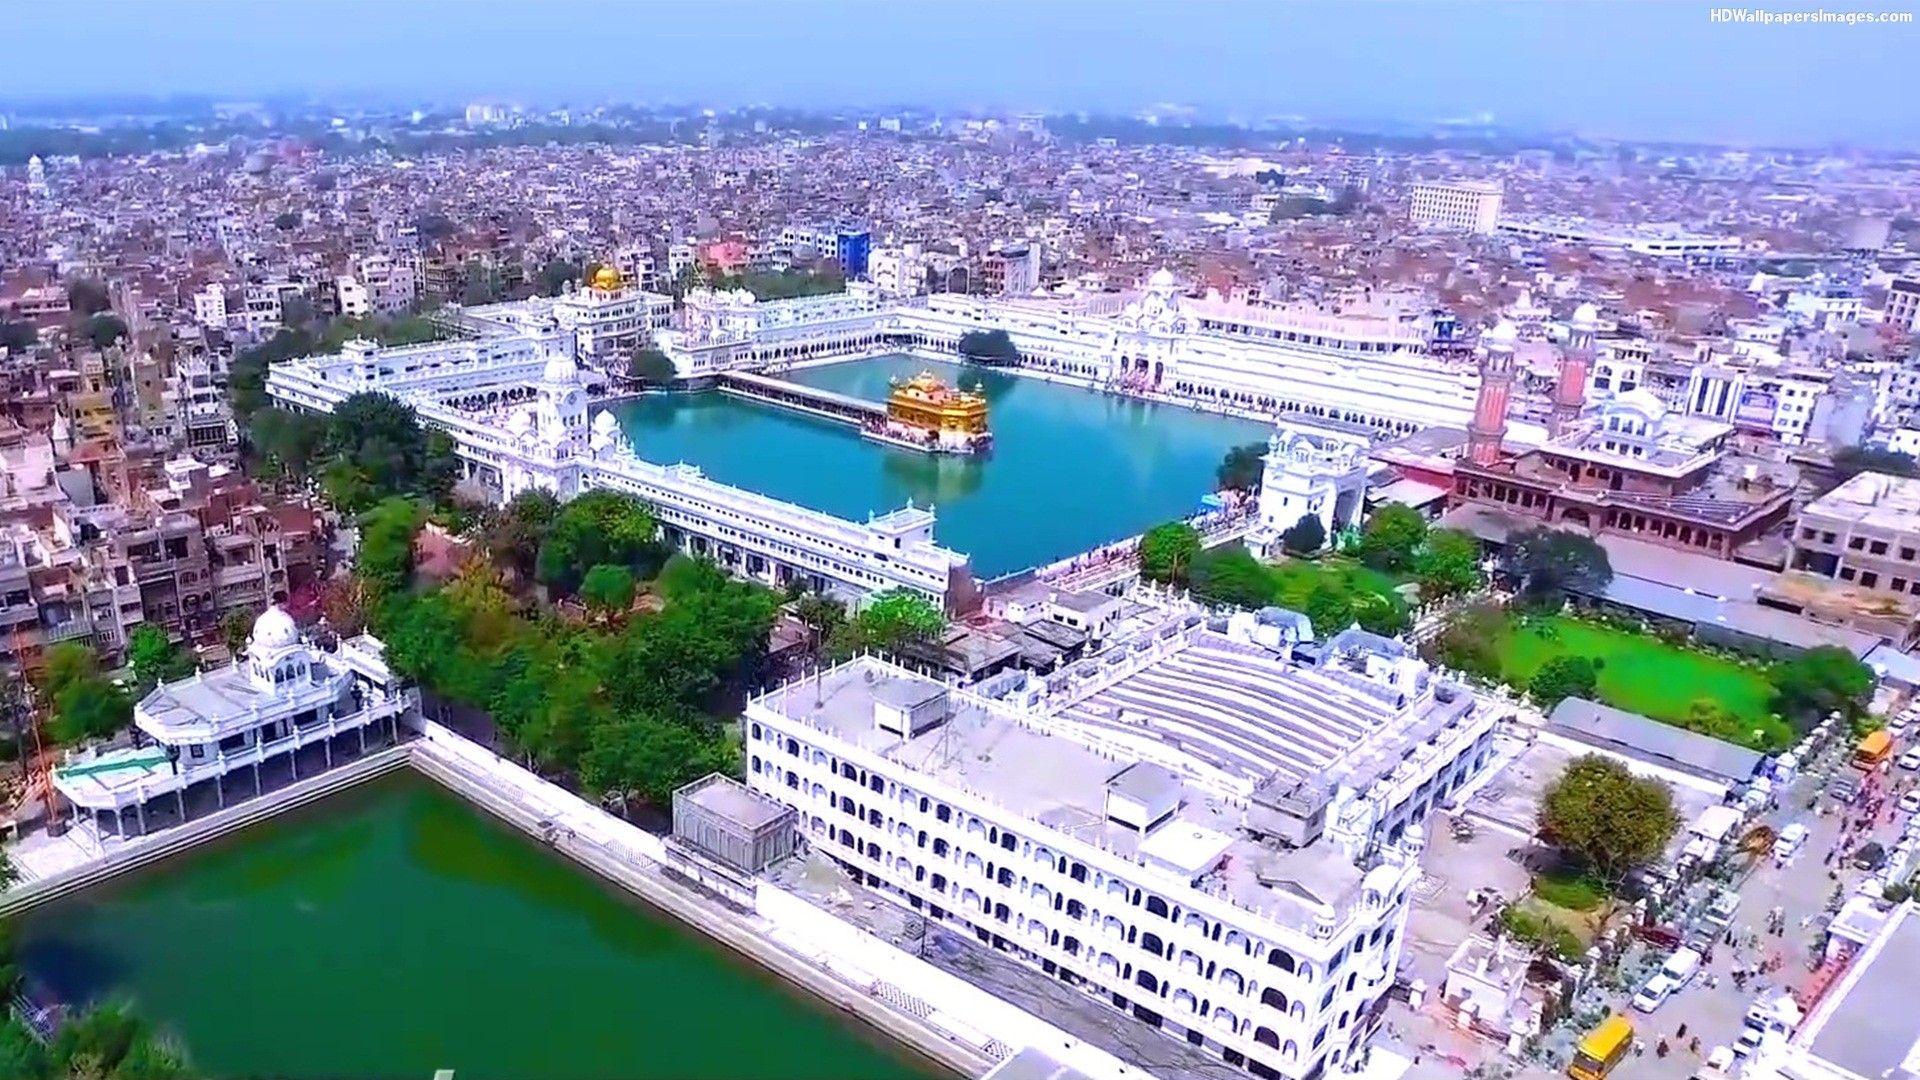 The Day Golden Temple was attacked